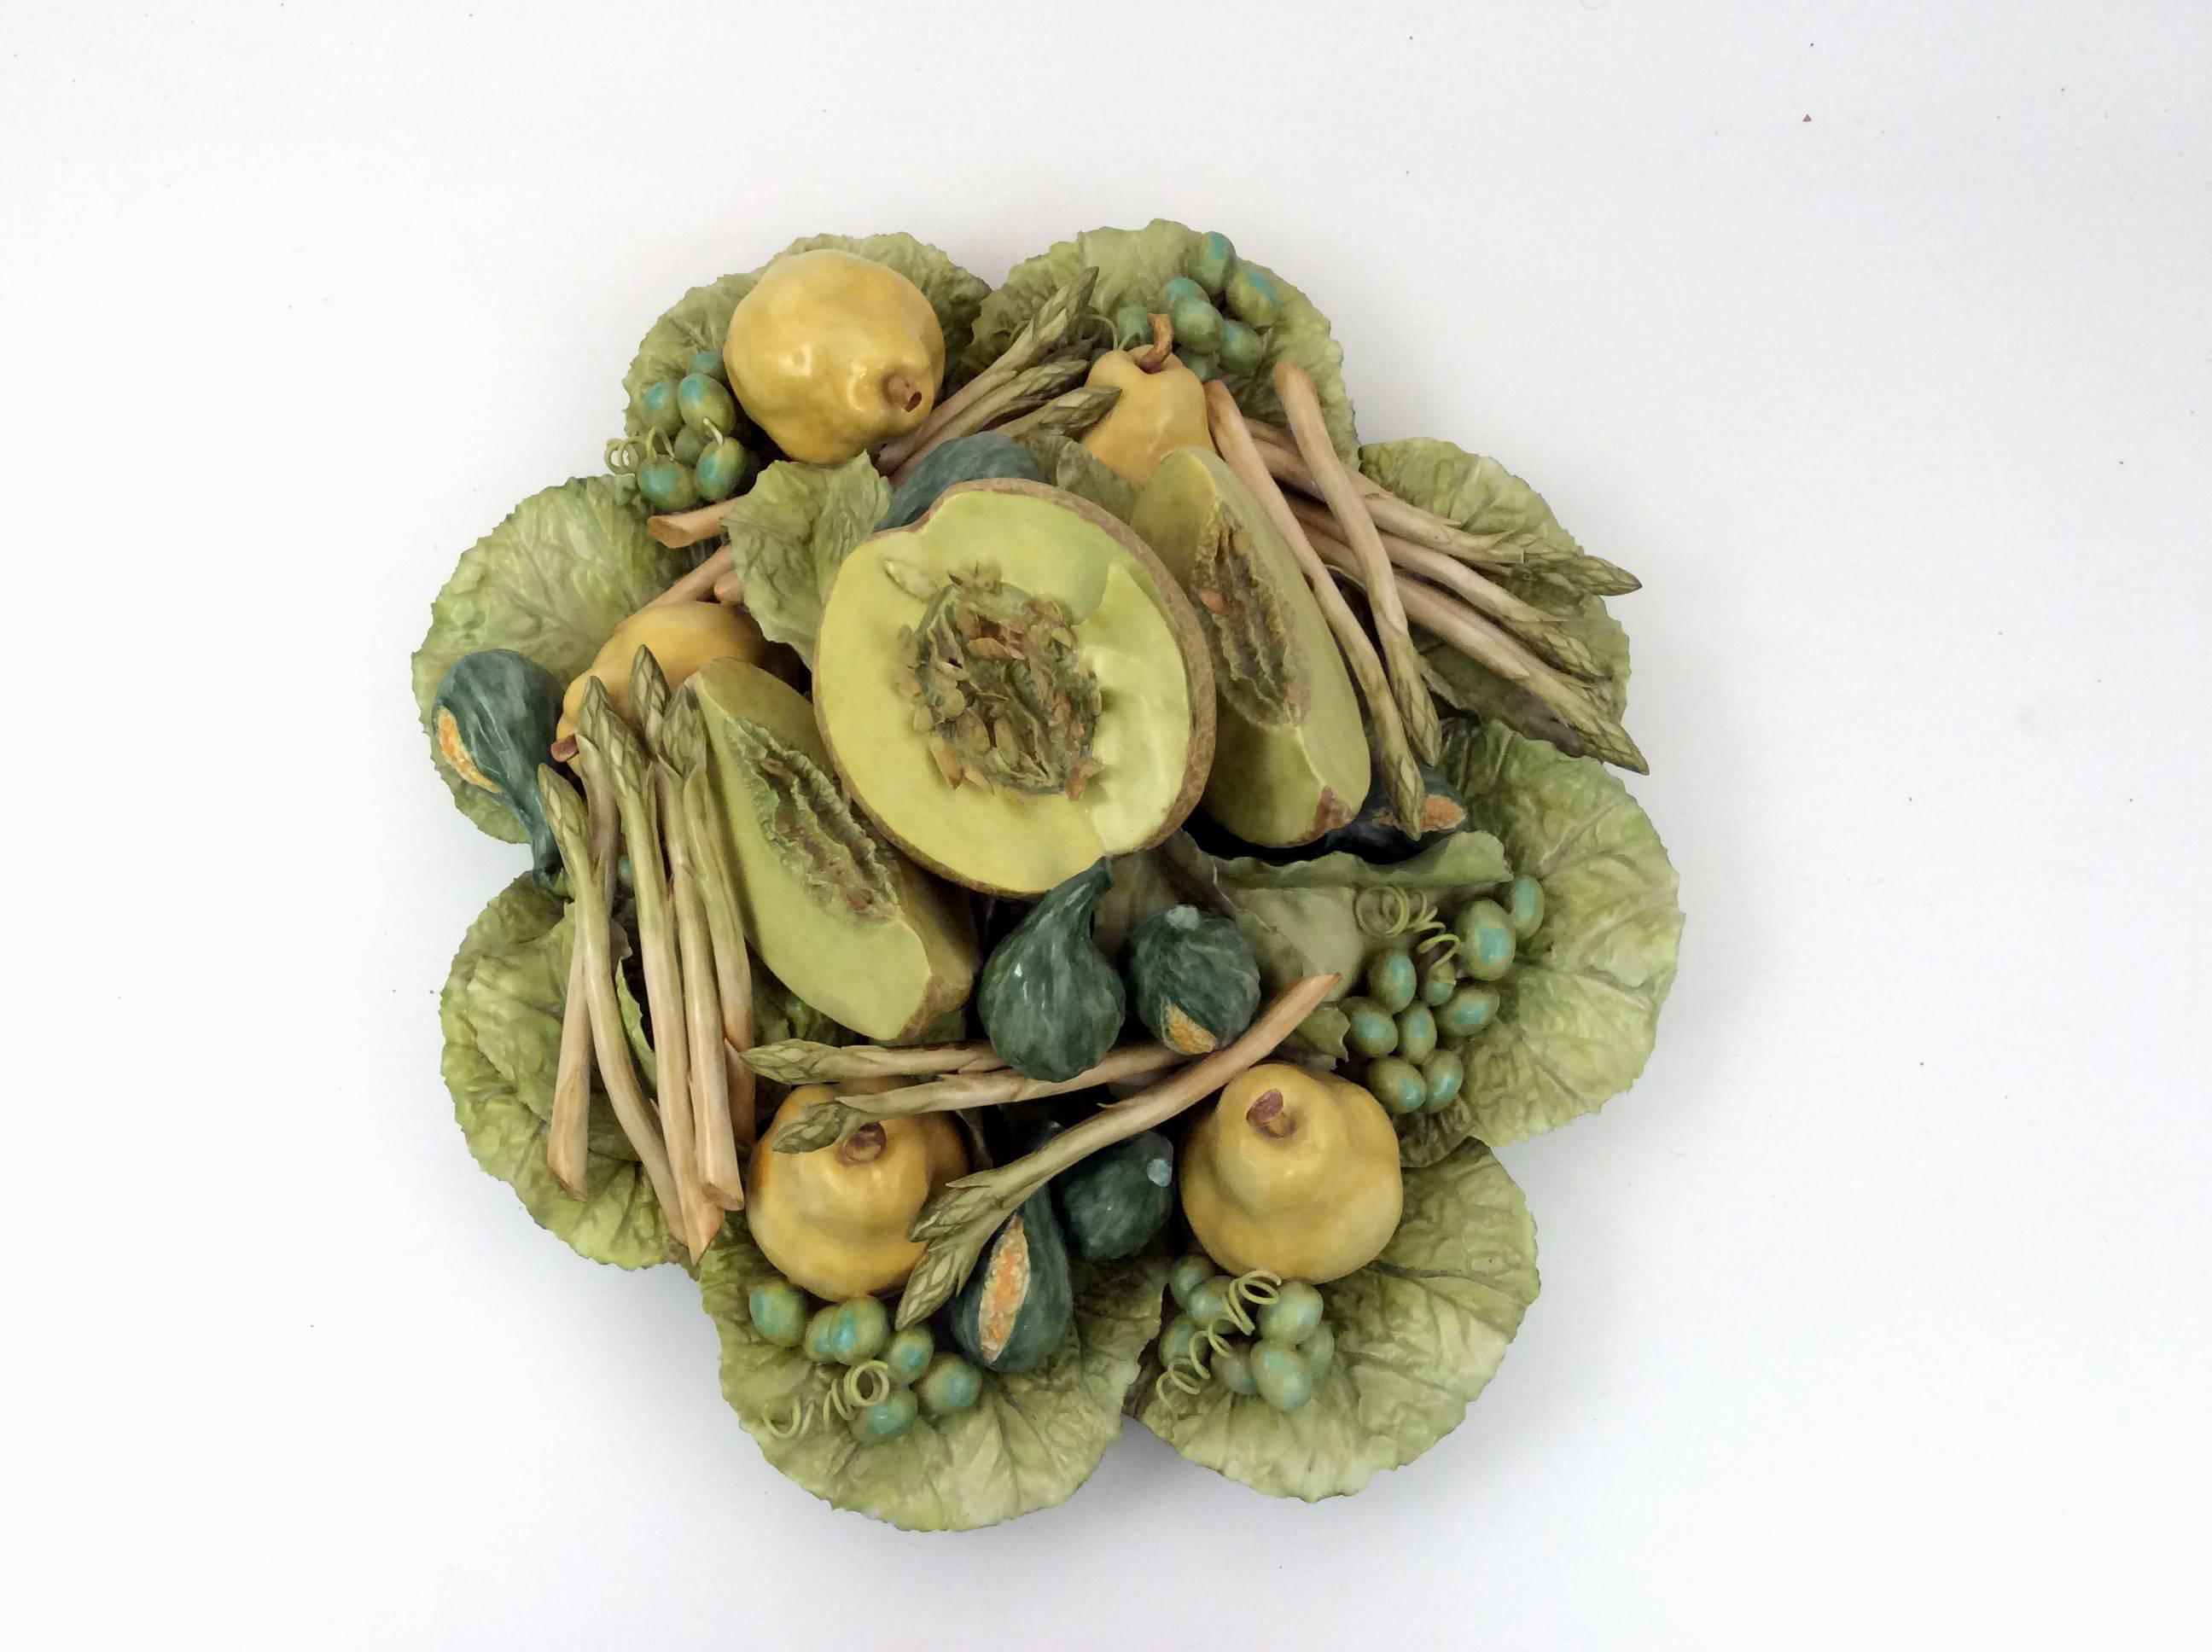 This is a large centerpiece with a central honeydew surrounded by figs, pears, grapes, and asparagus in a bowl of leaves all in a variety of soft green and yellow hues. this is a one of a kind handcrafted piece.
Katherine Houston is a living artist